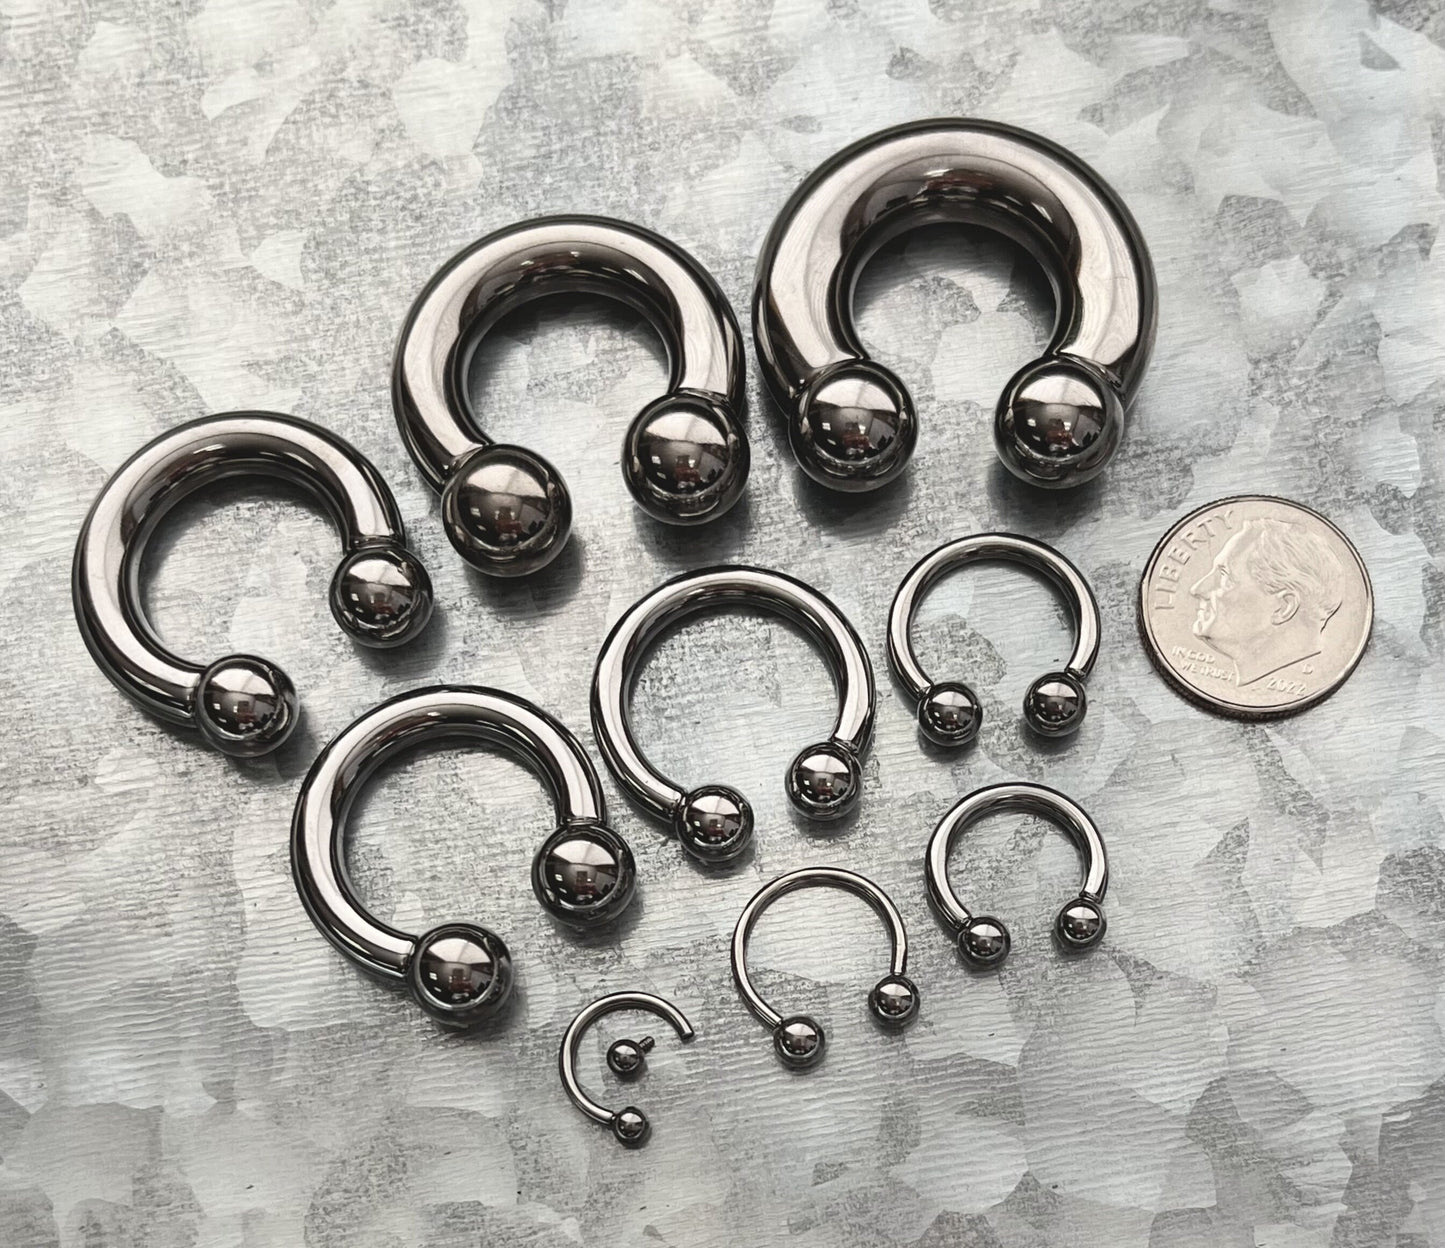 1 Piece Steel Circular Barbell Horseshoe Ring - 16g, 14g, 12g, 10g, 8g, 6g, 4g 2g, 0g, 00g with Assorted Internal Diameter and Ball Size!!